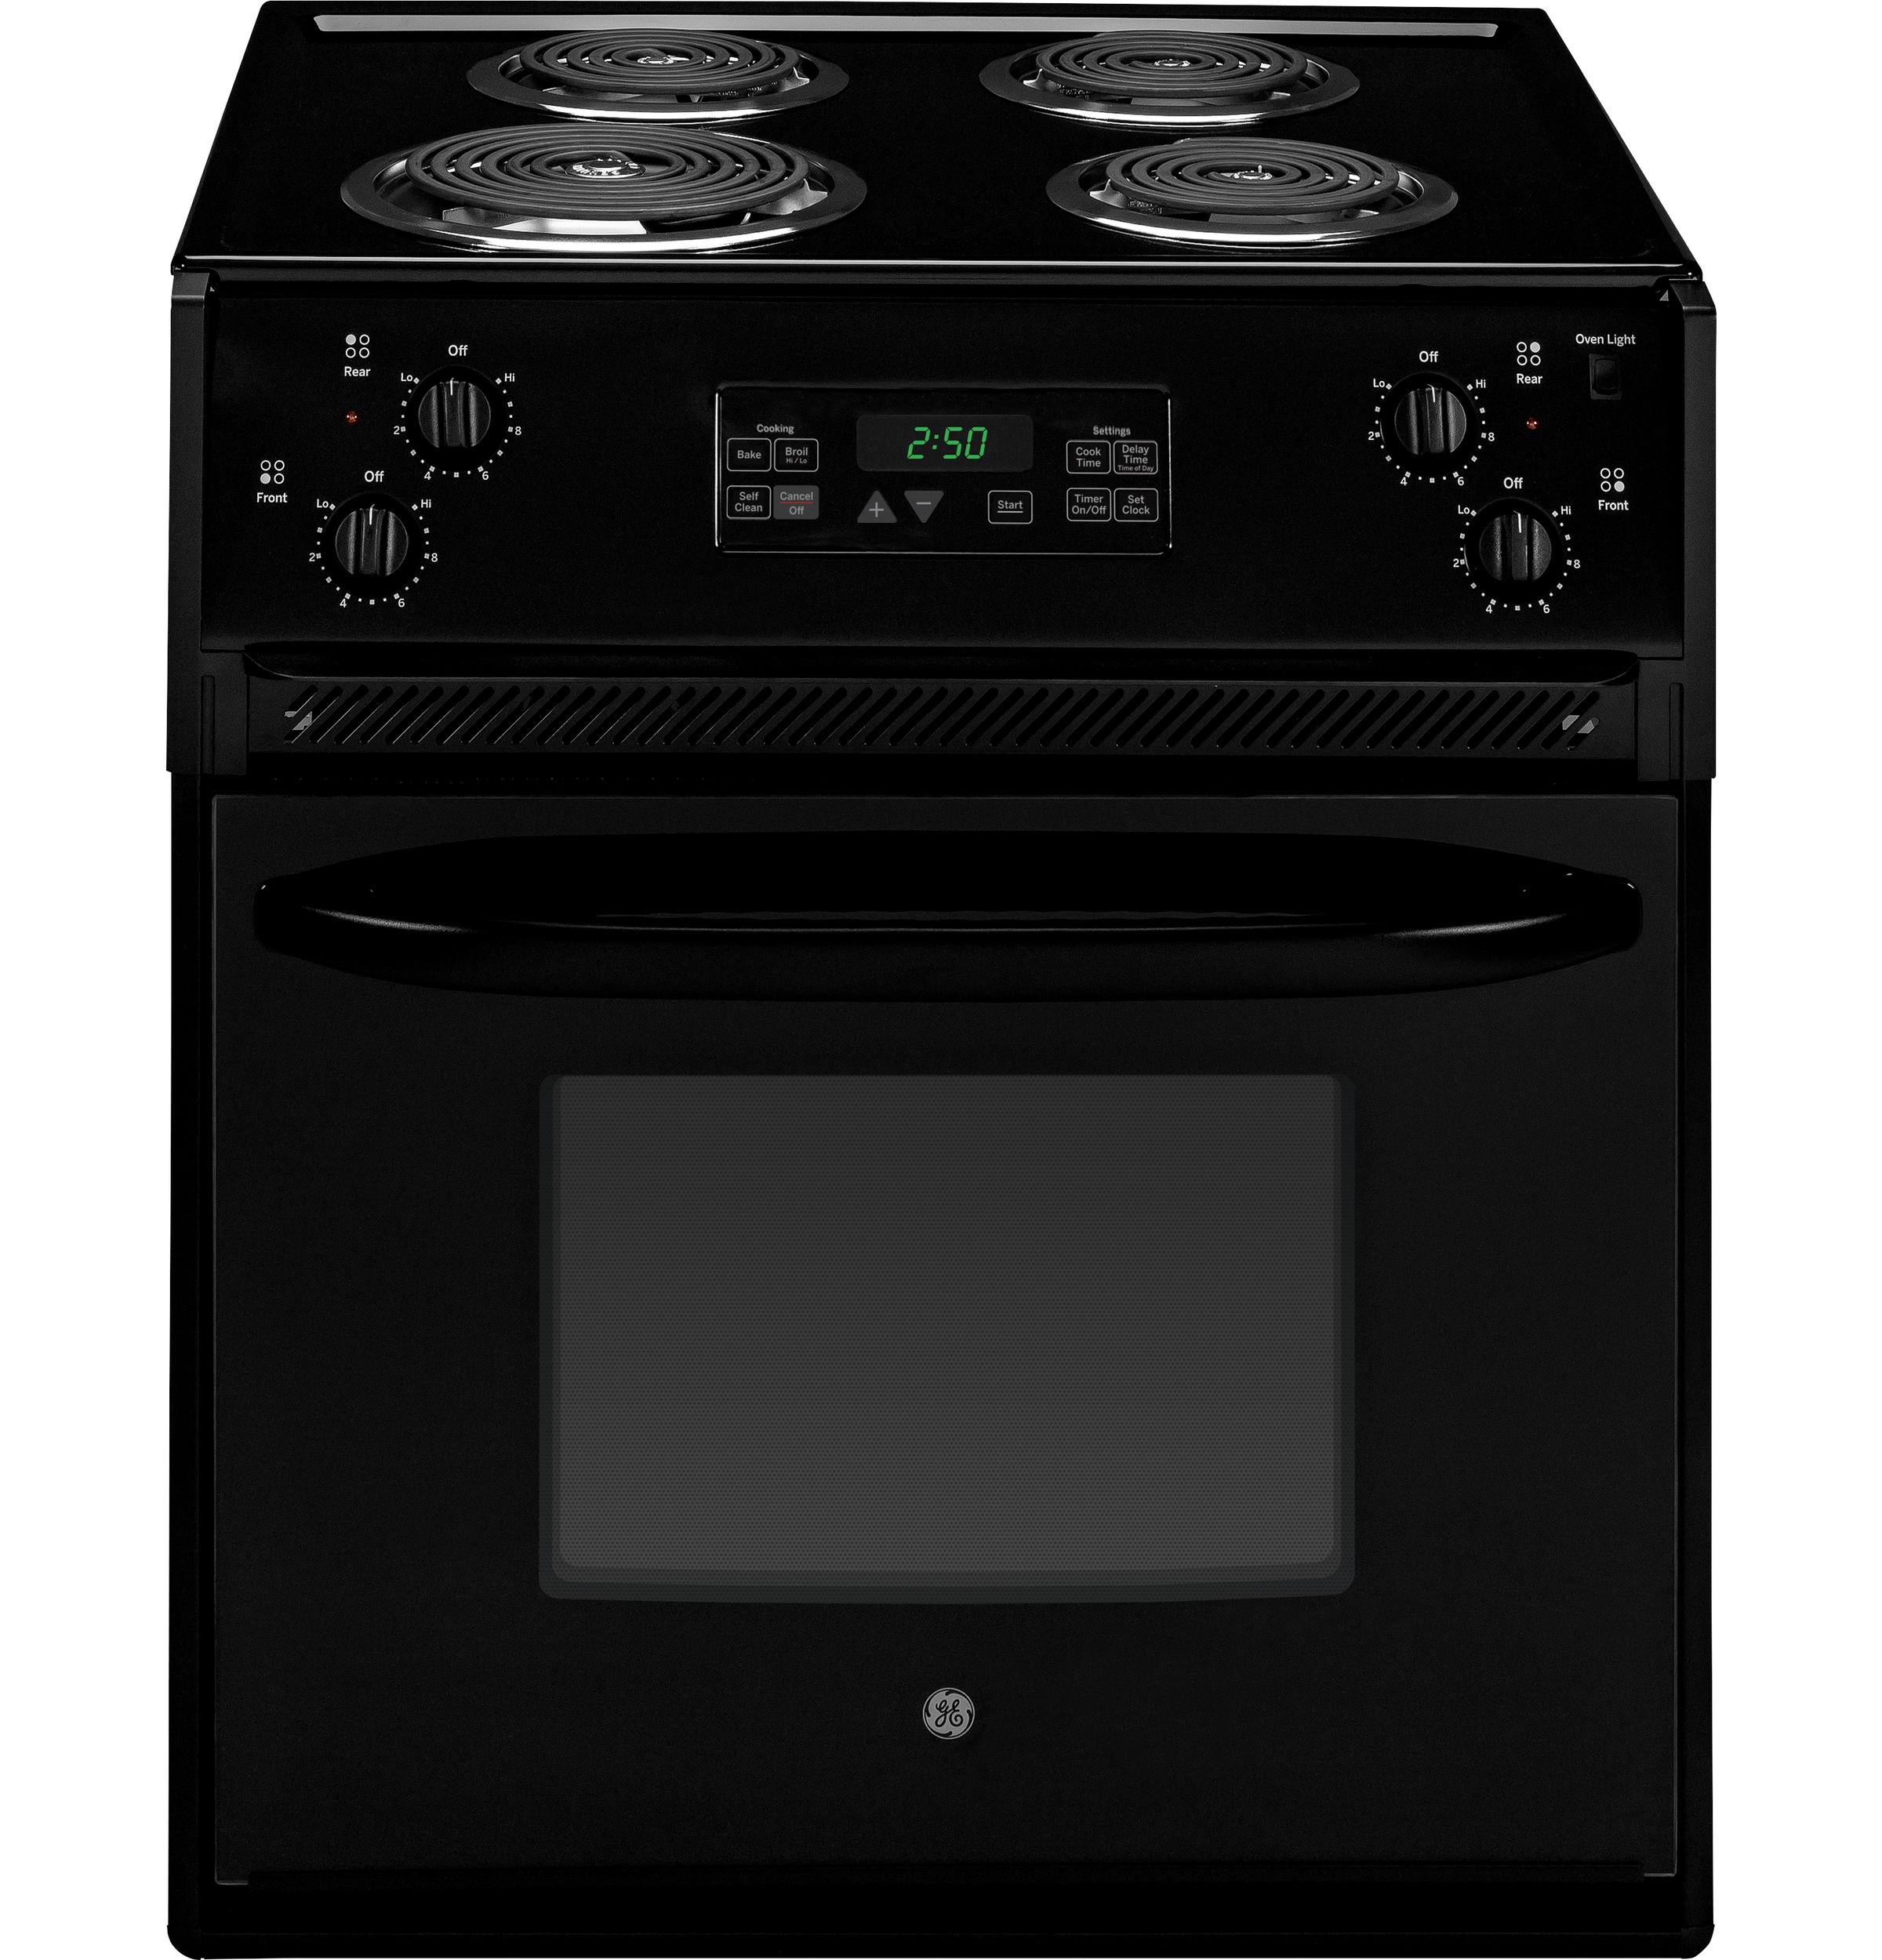 Details about   164D2851P008 WB27X5526 Black GE Stove Control *LIFETIME* 2-3 Day Delivery 